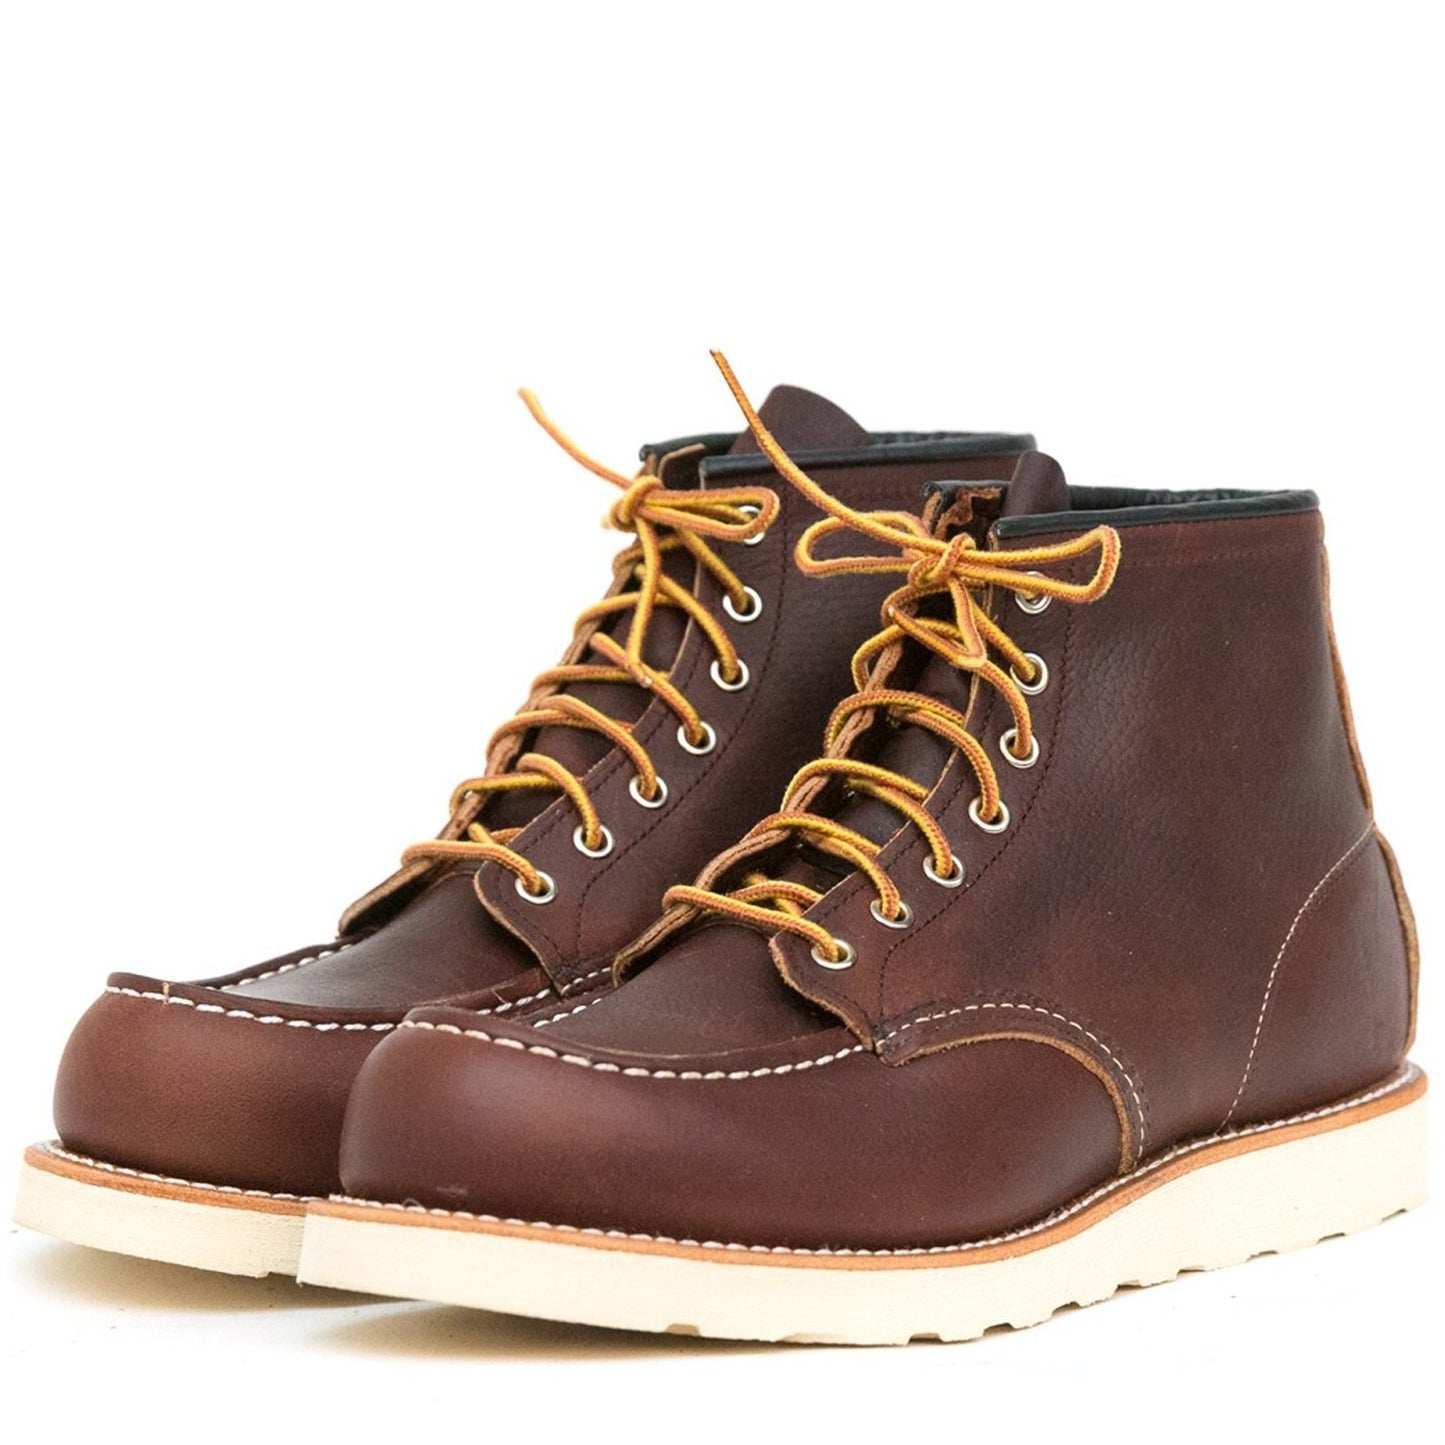 RED WING - 8138 Classic Moc Toe